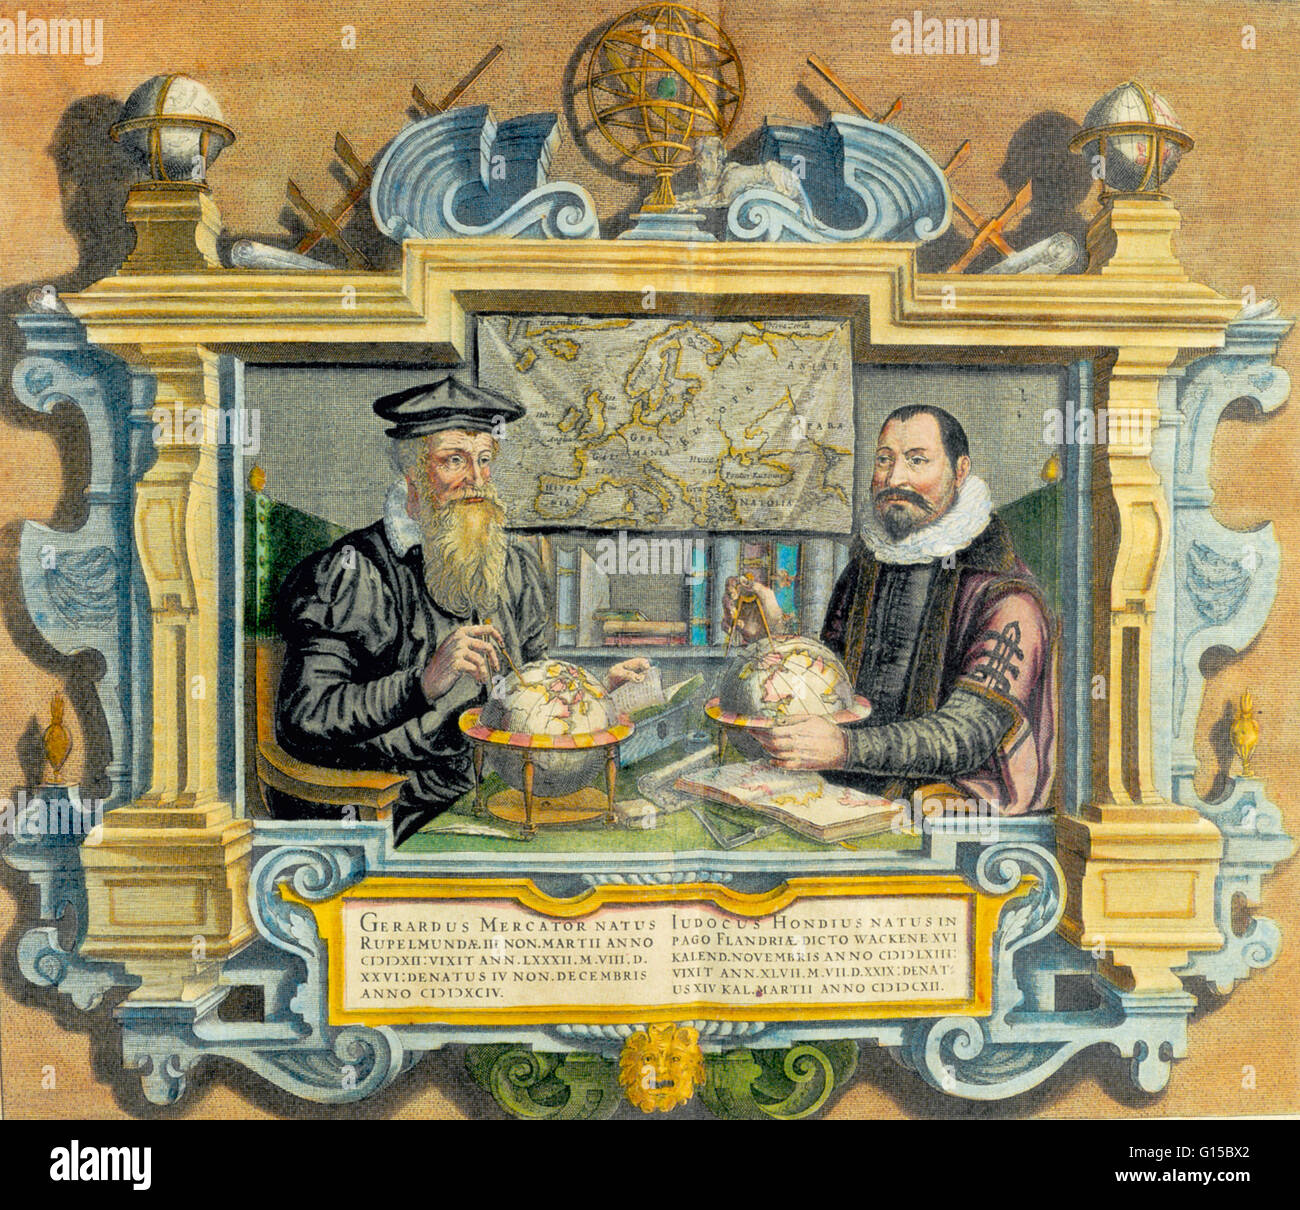 Double portrait of Gerardus Mercator (left) (1512-1594) and Jodocus Hondius (1563-1612) from the Mercator-Hondius atlas of 1612. Flemish geographer Gerardus Mercator's most enduring contribution was his Mercator Projection or Mercator Chart. The Mercator Stock Photo